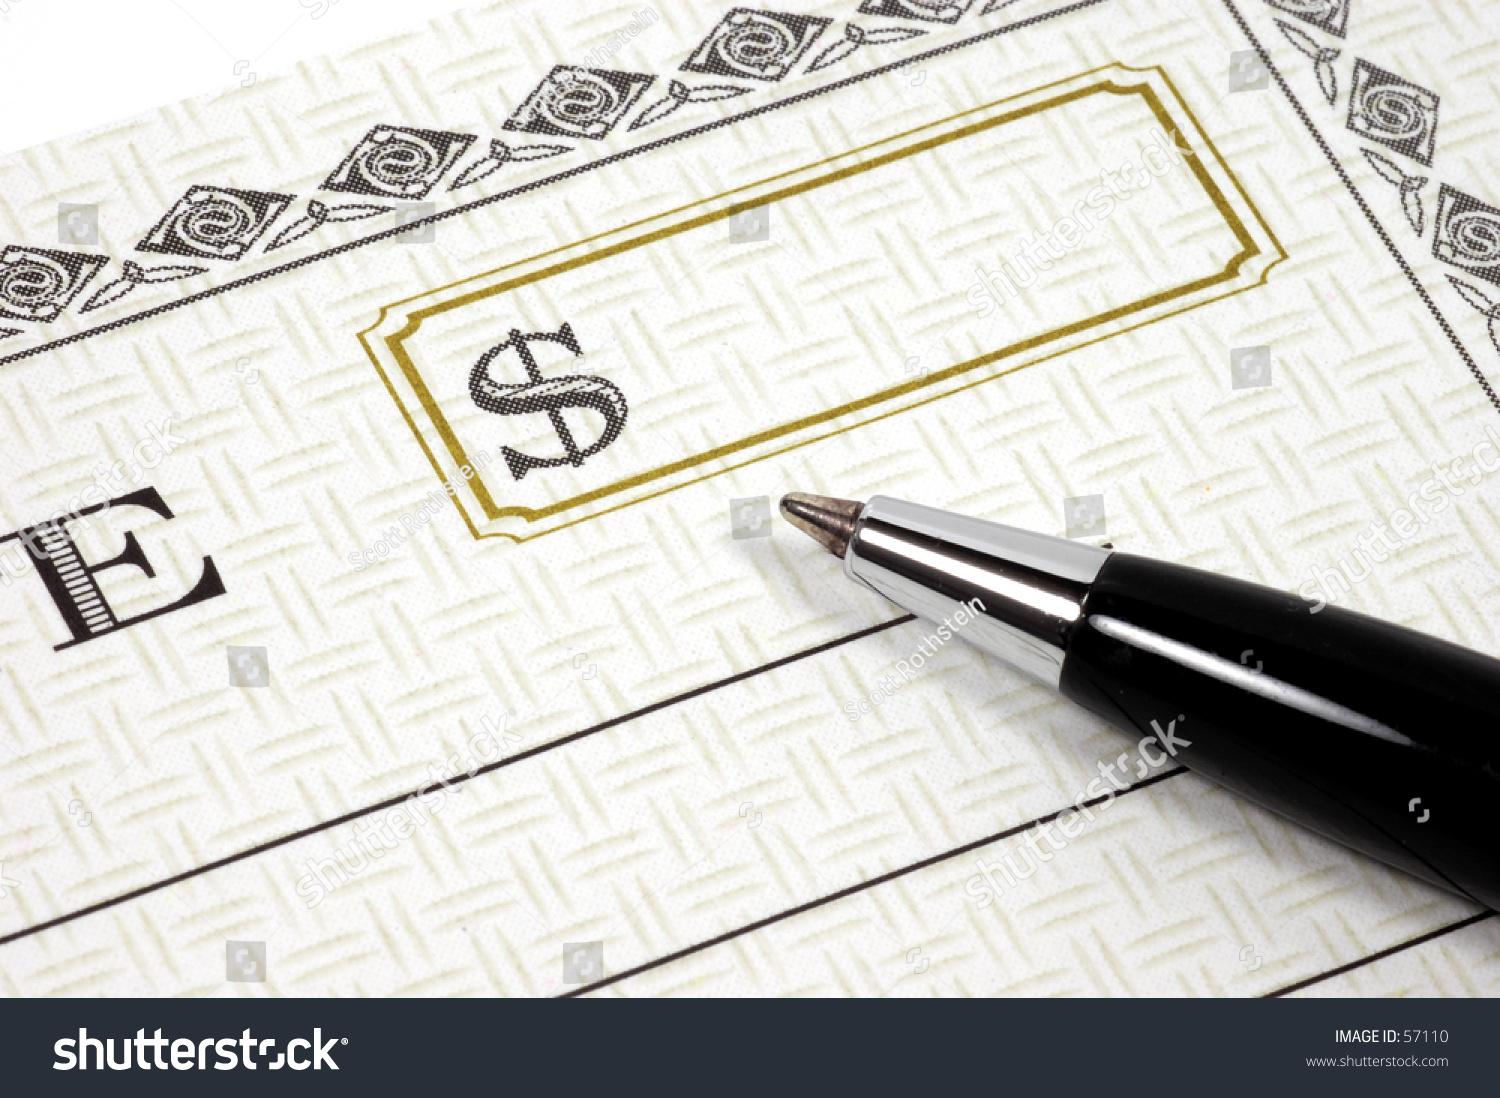 Photo Of A Blank Check - 57110 : Shutterstock